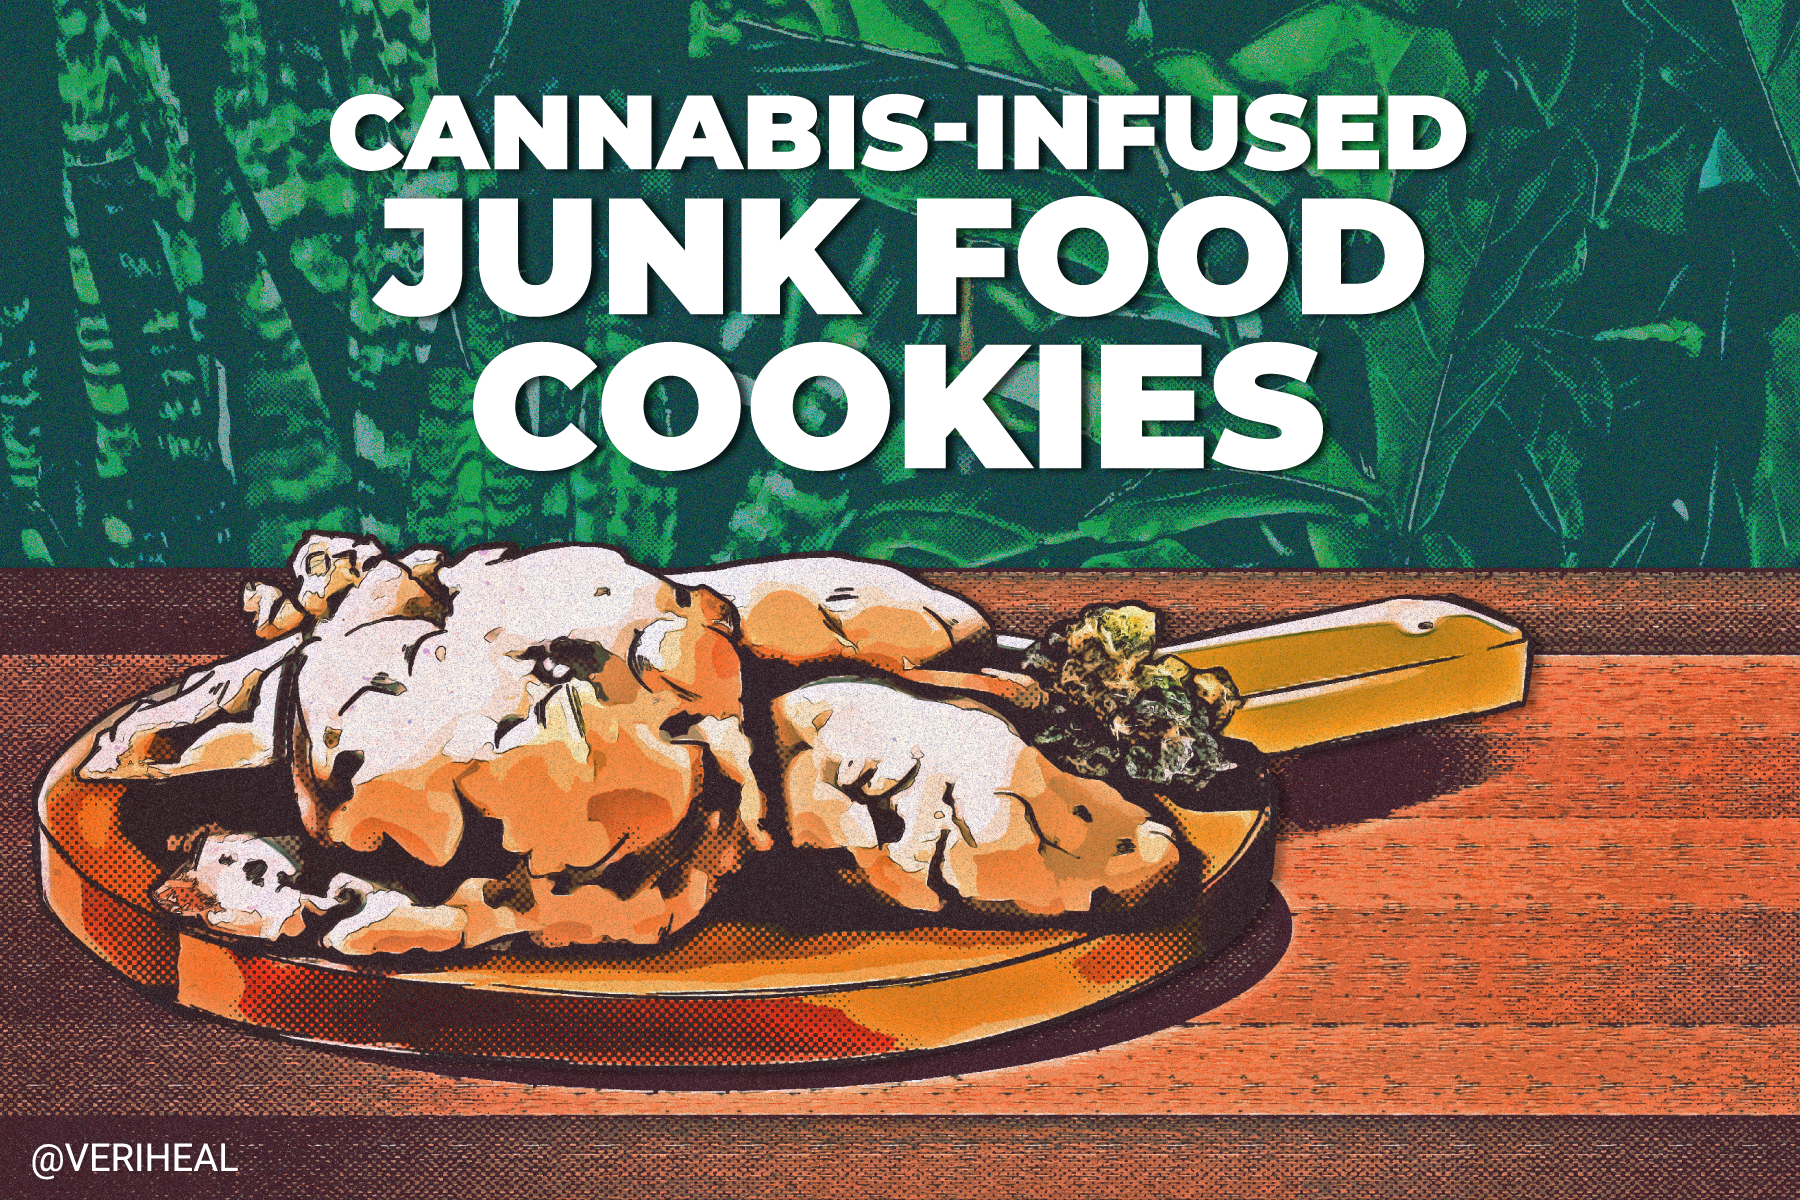 How to Make Cannabis-Infused Junk Food Cookies